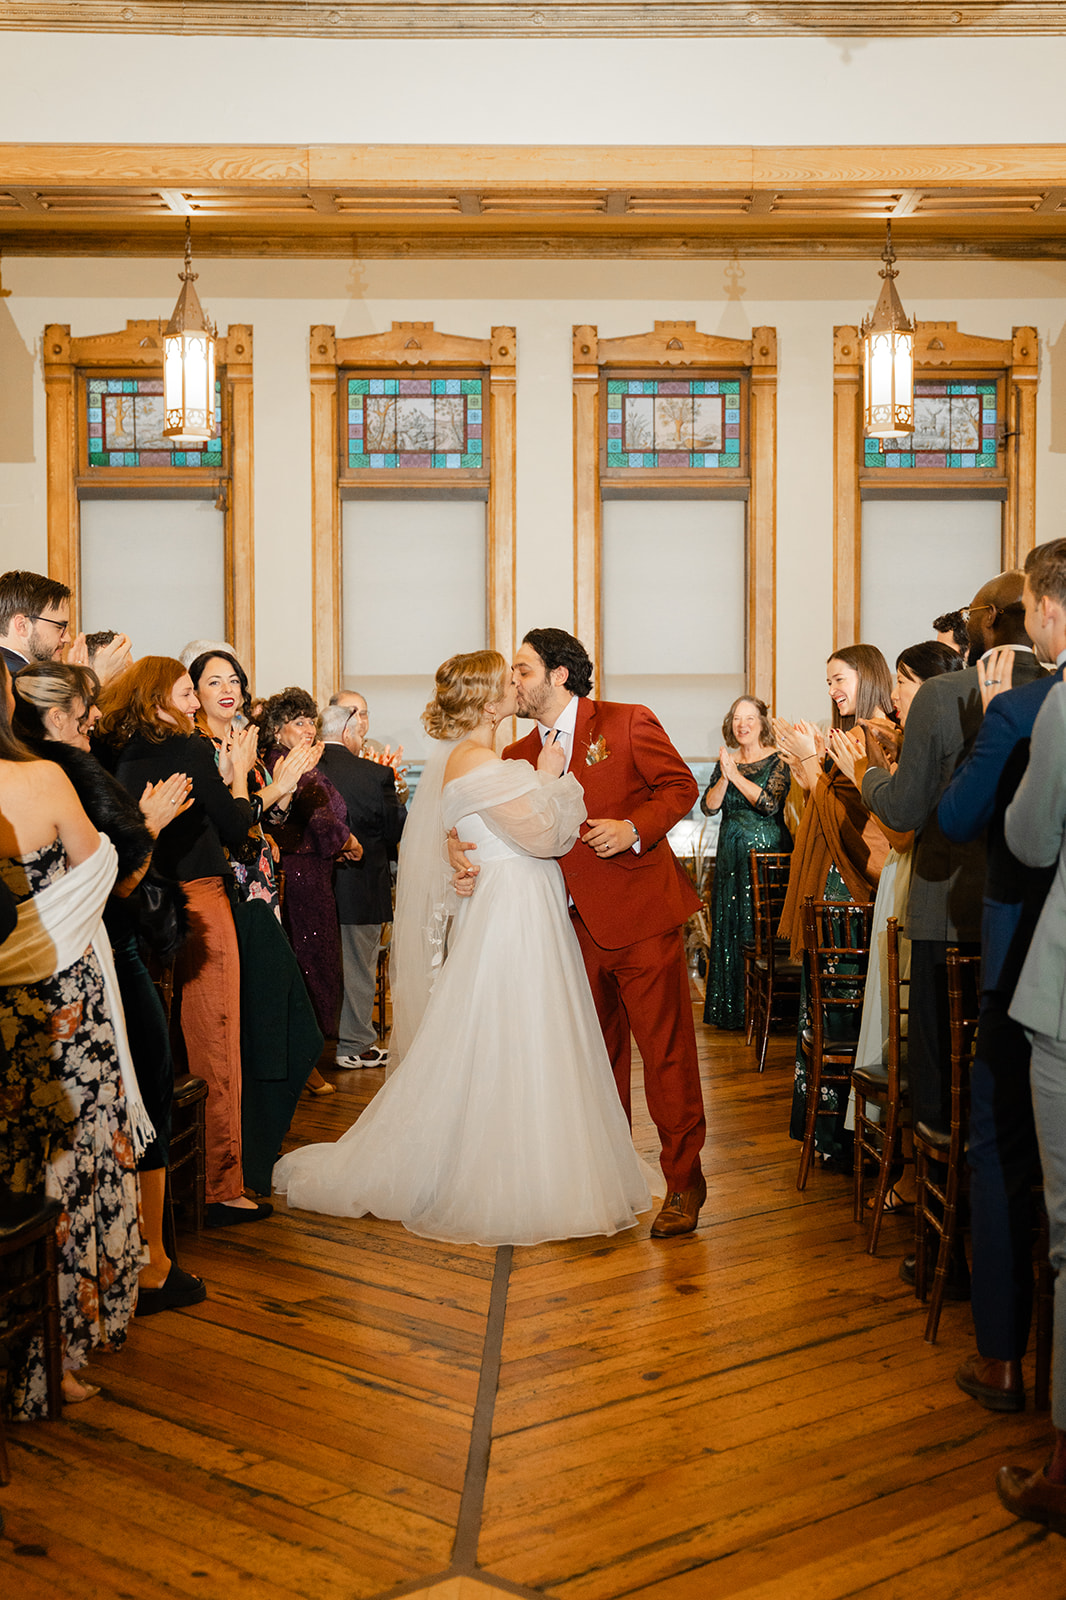 The Best Place at the Historic Pabst Brewery Wedding Photographer